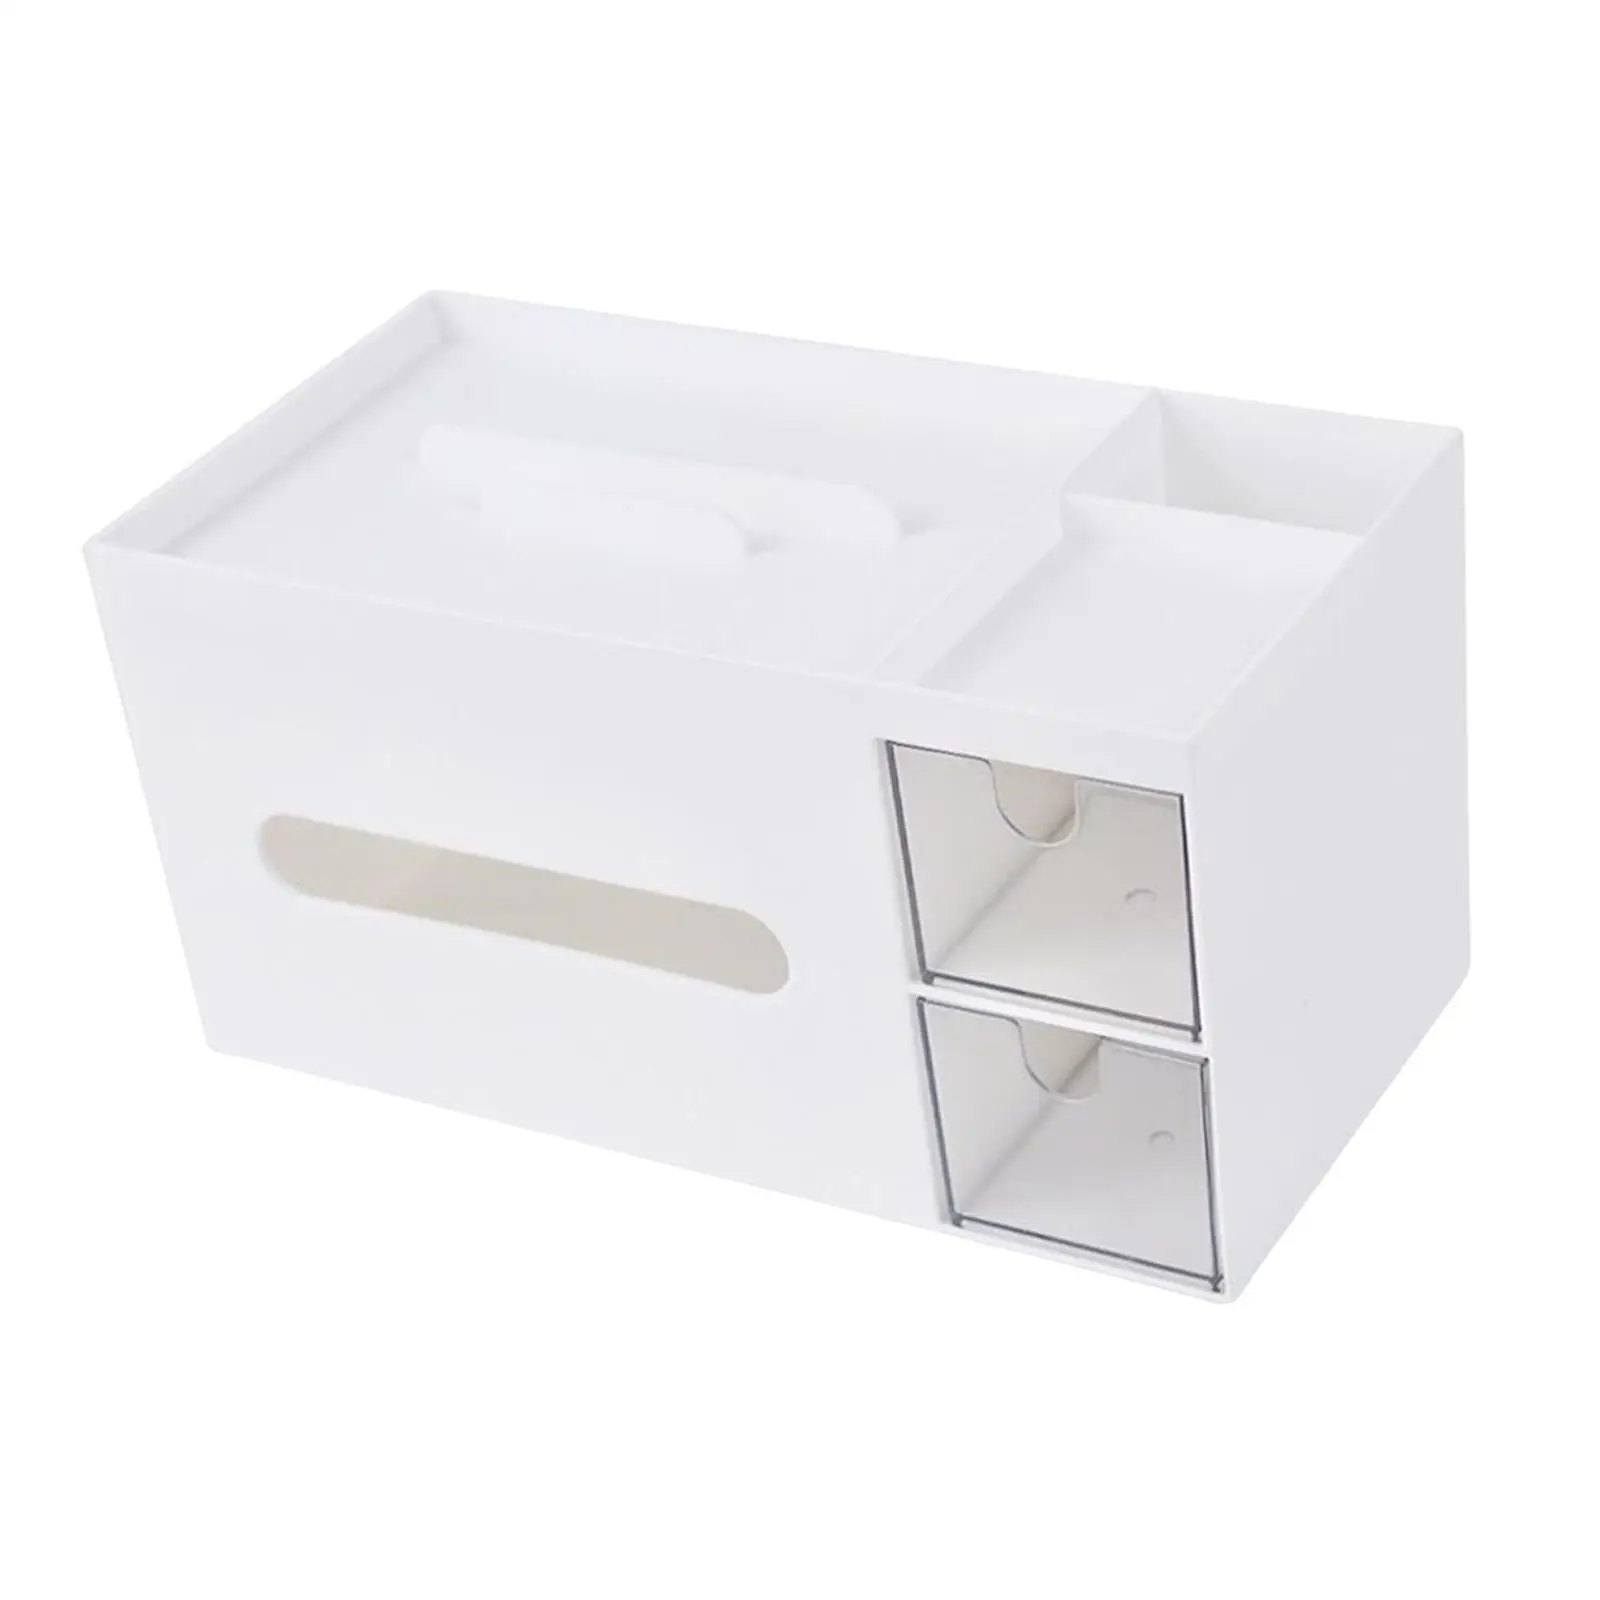 Tissue Box with Storage Compartment for Restaurant Dining Room Kitchen